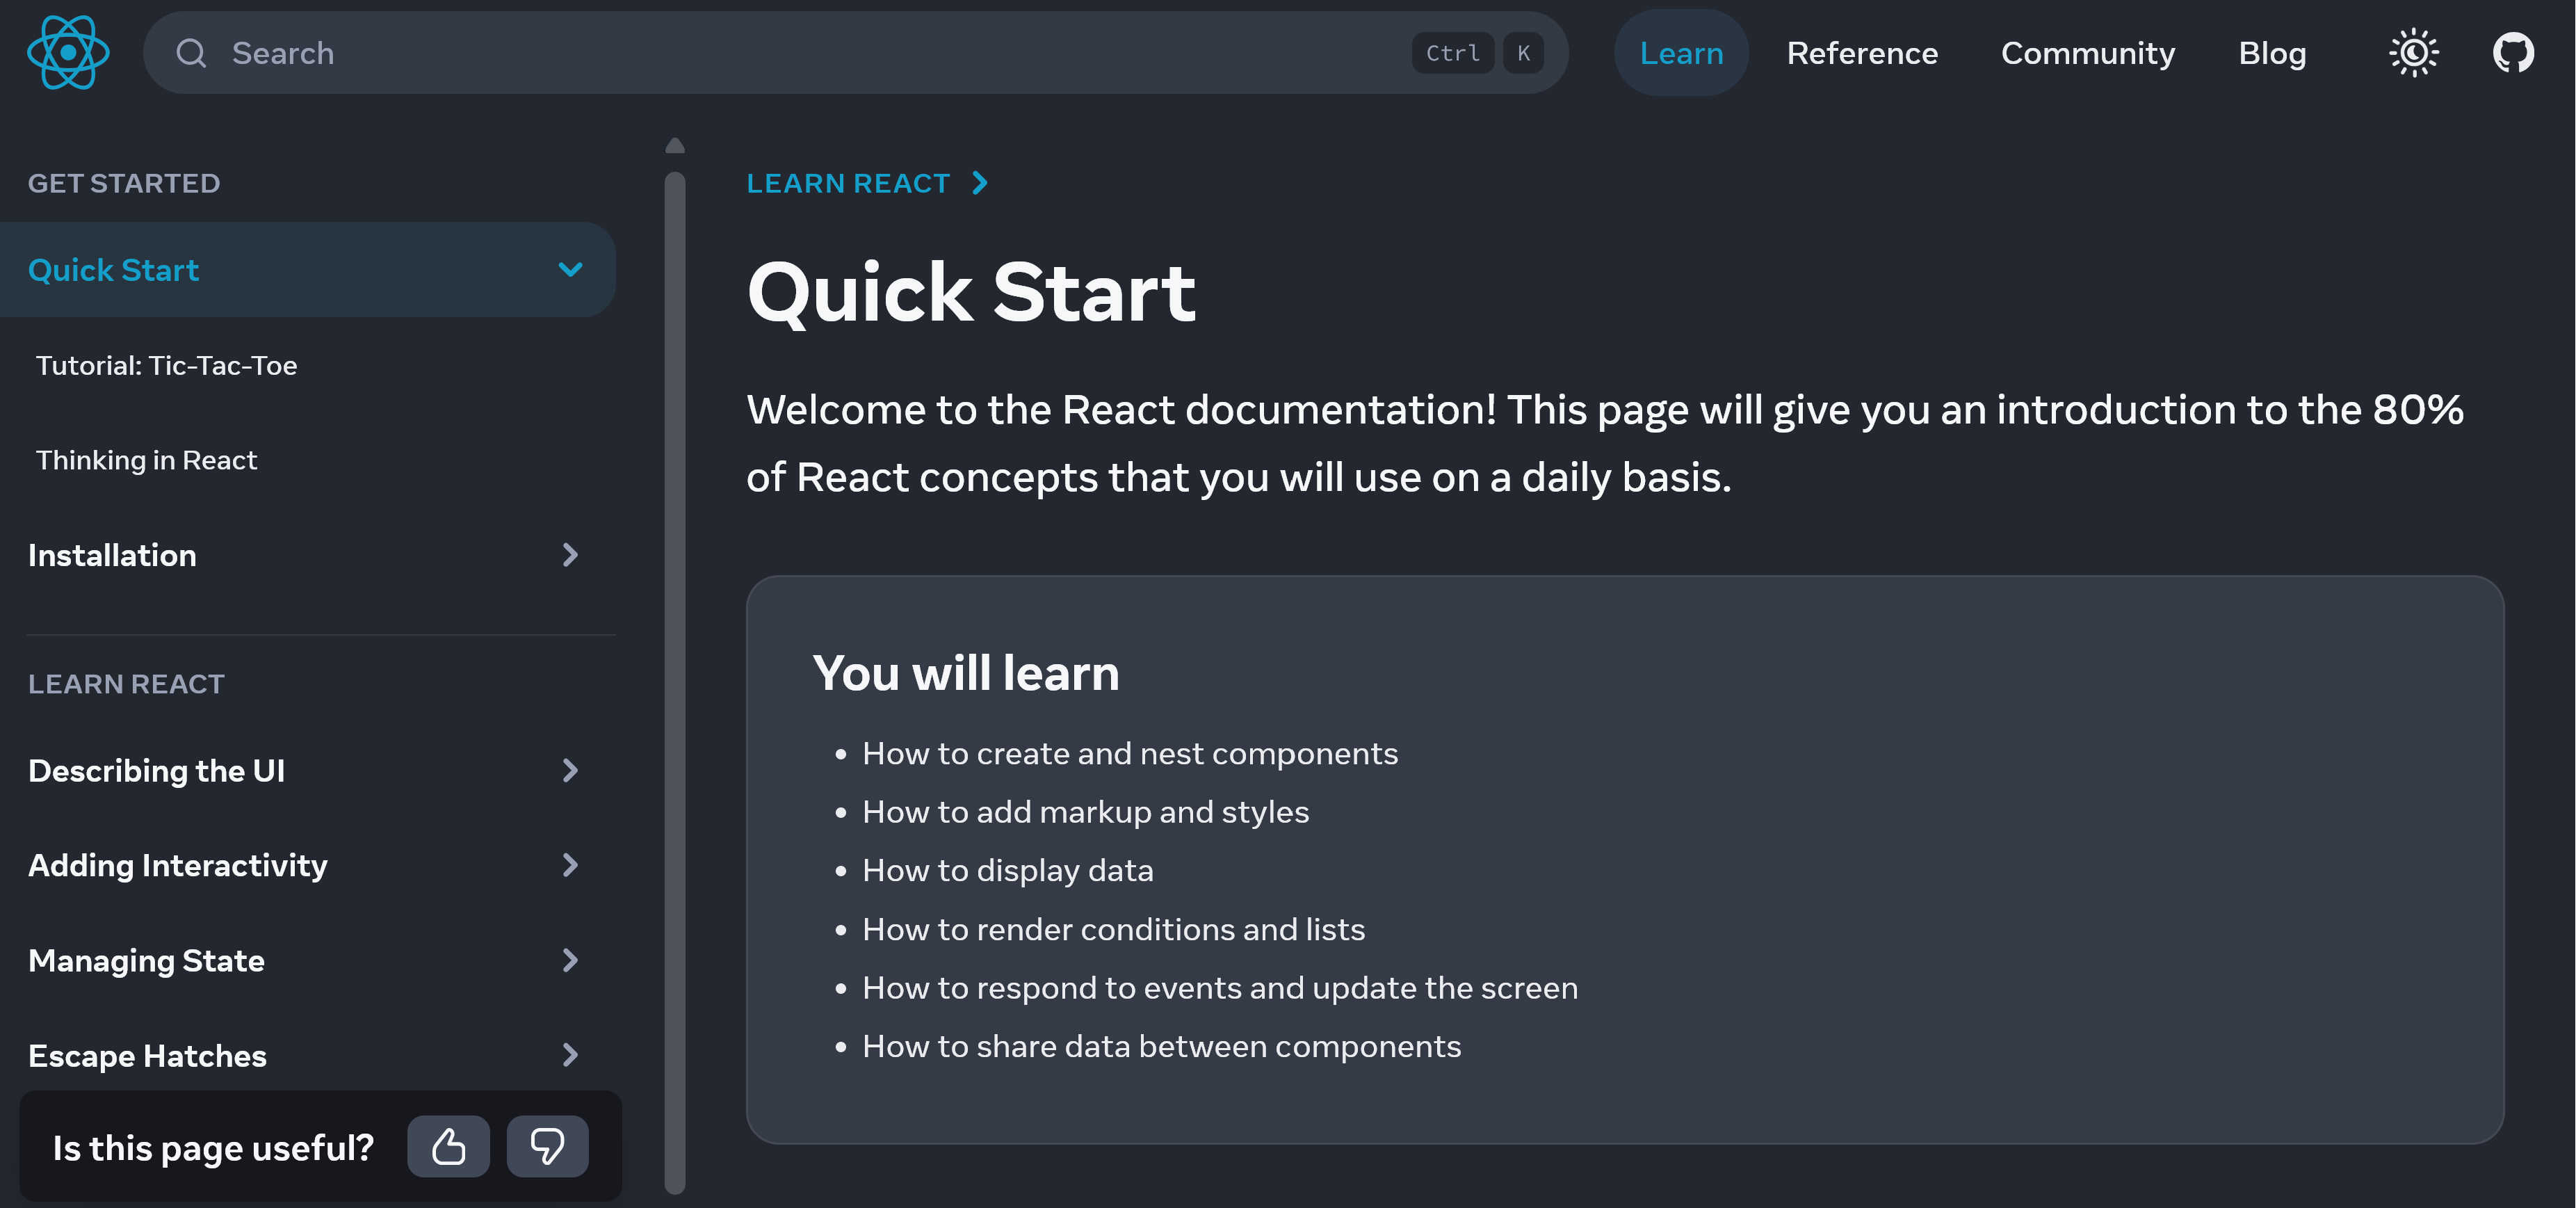 React's starting page for its documentation